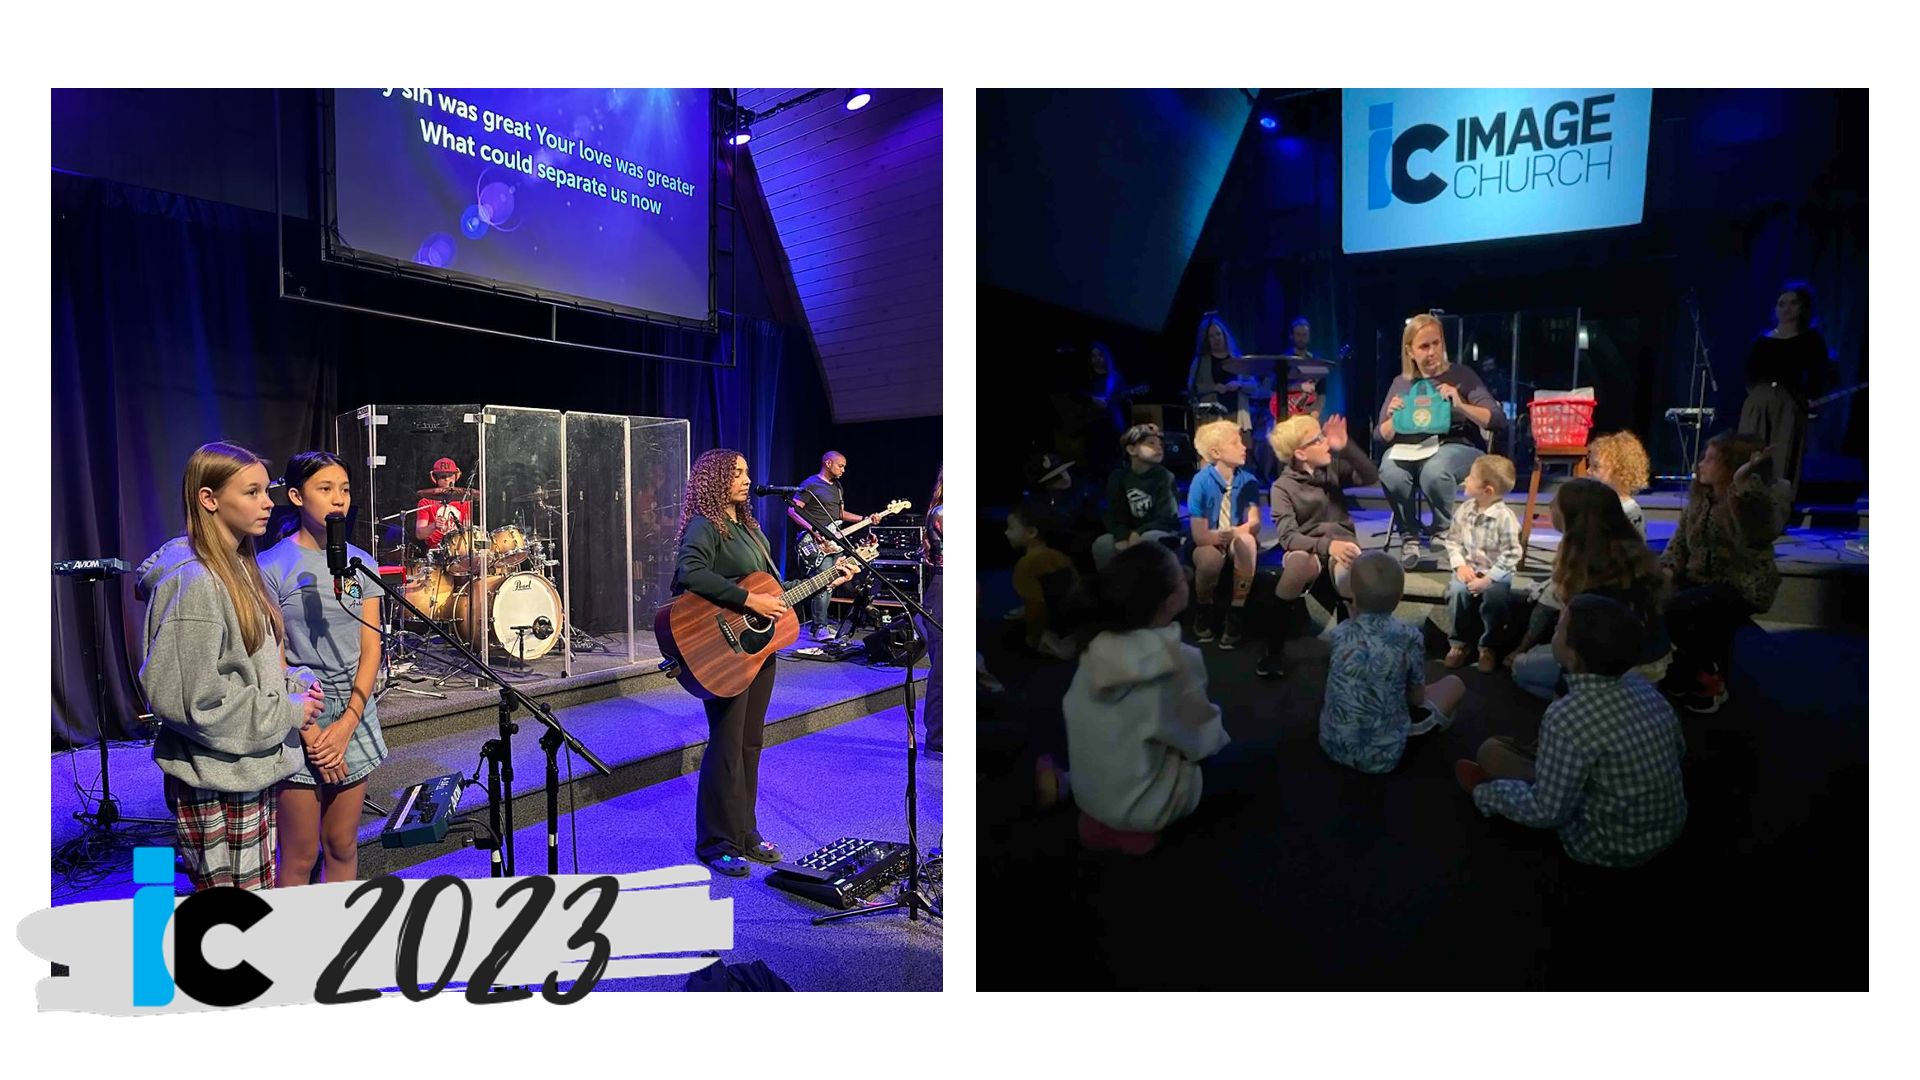    We hosted Generation Sundays throughout the year where our entire Church body from babies on up to grandparents worshiped in the auditorium. These were special times where we could model for our children worshiping through prayer, song, and gettin